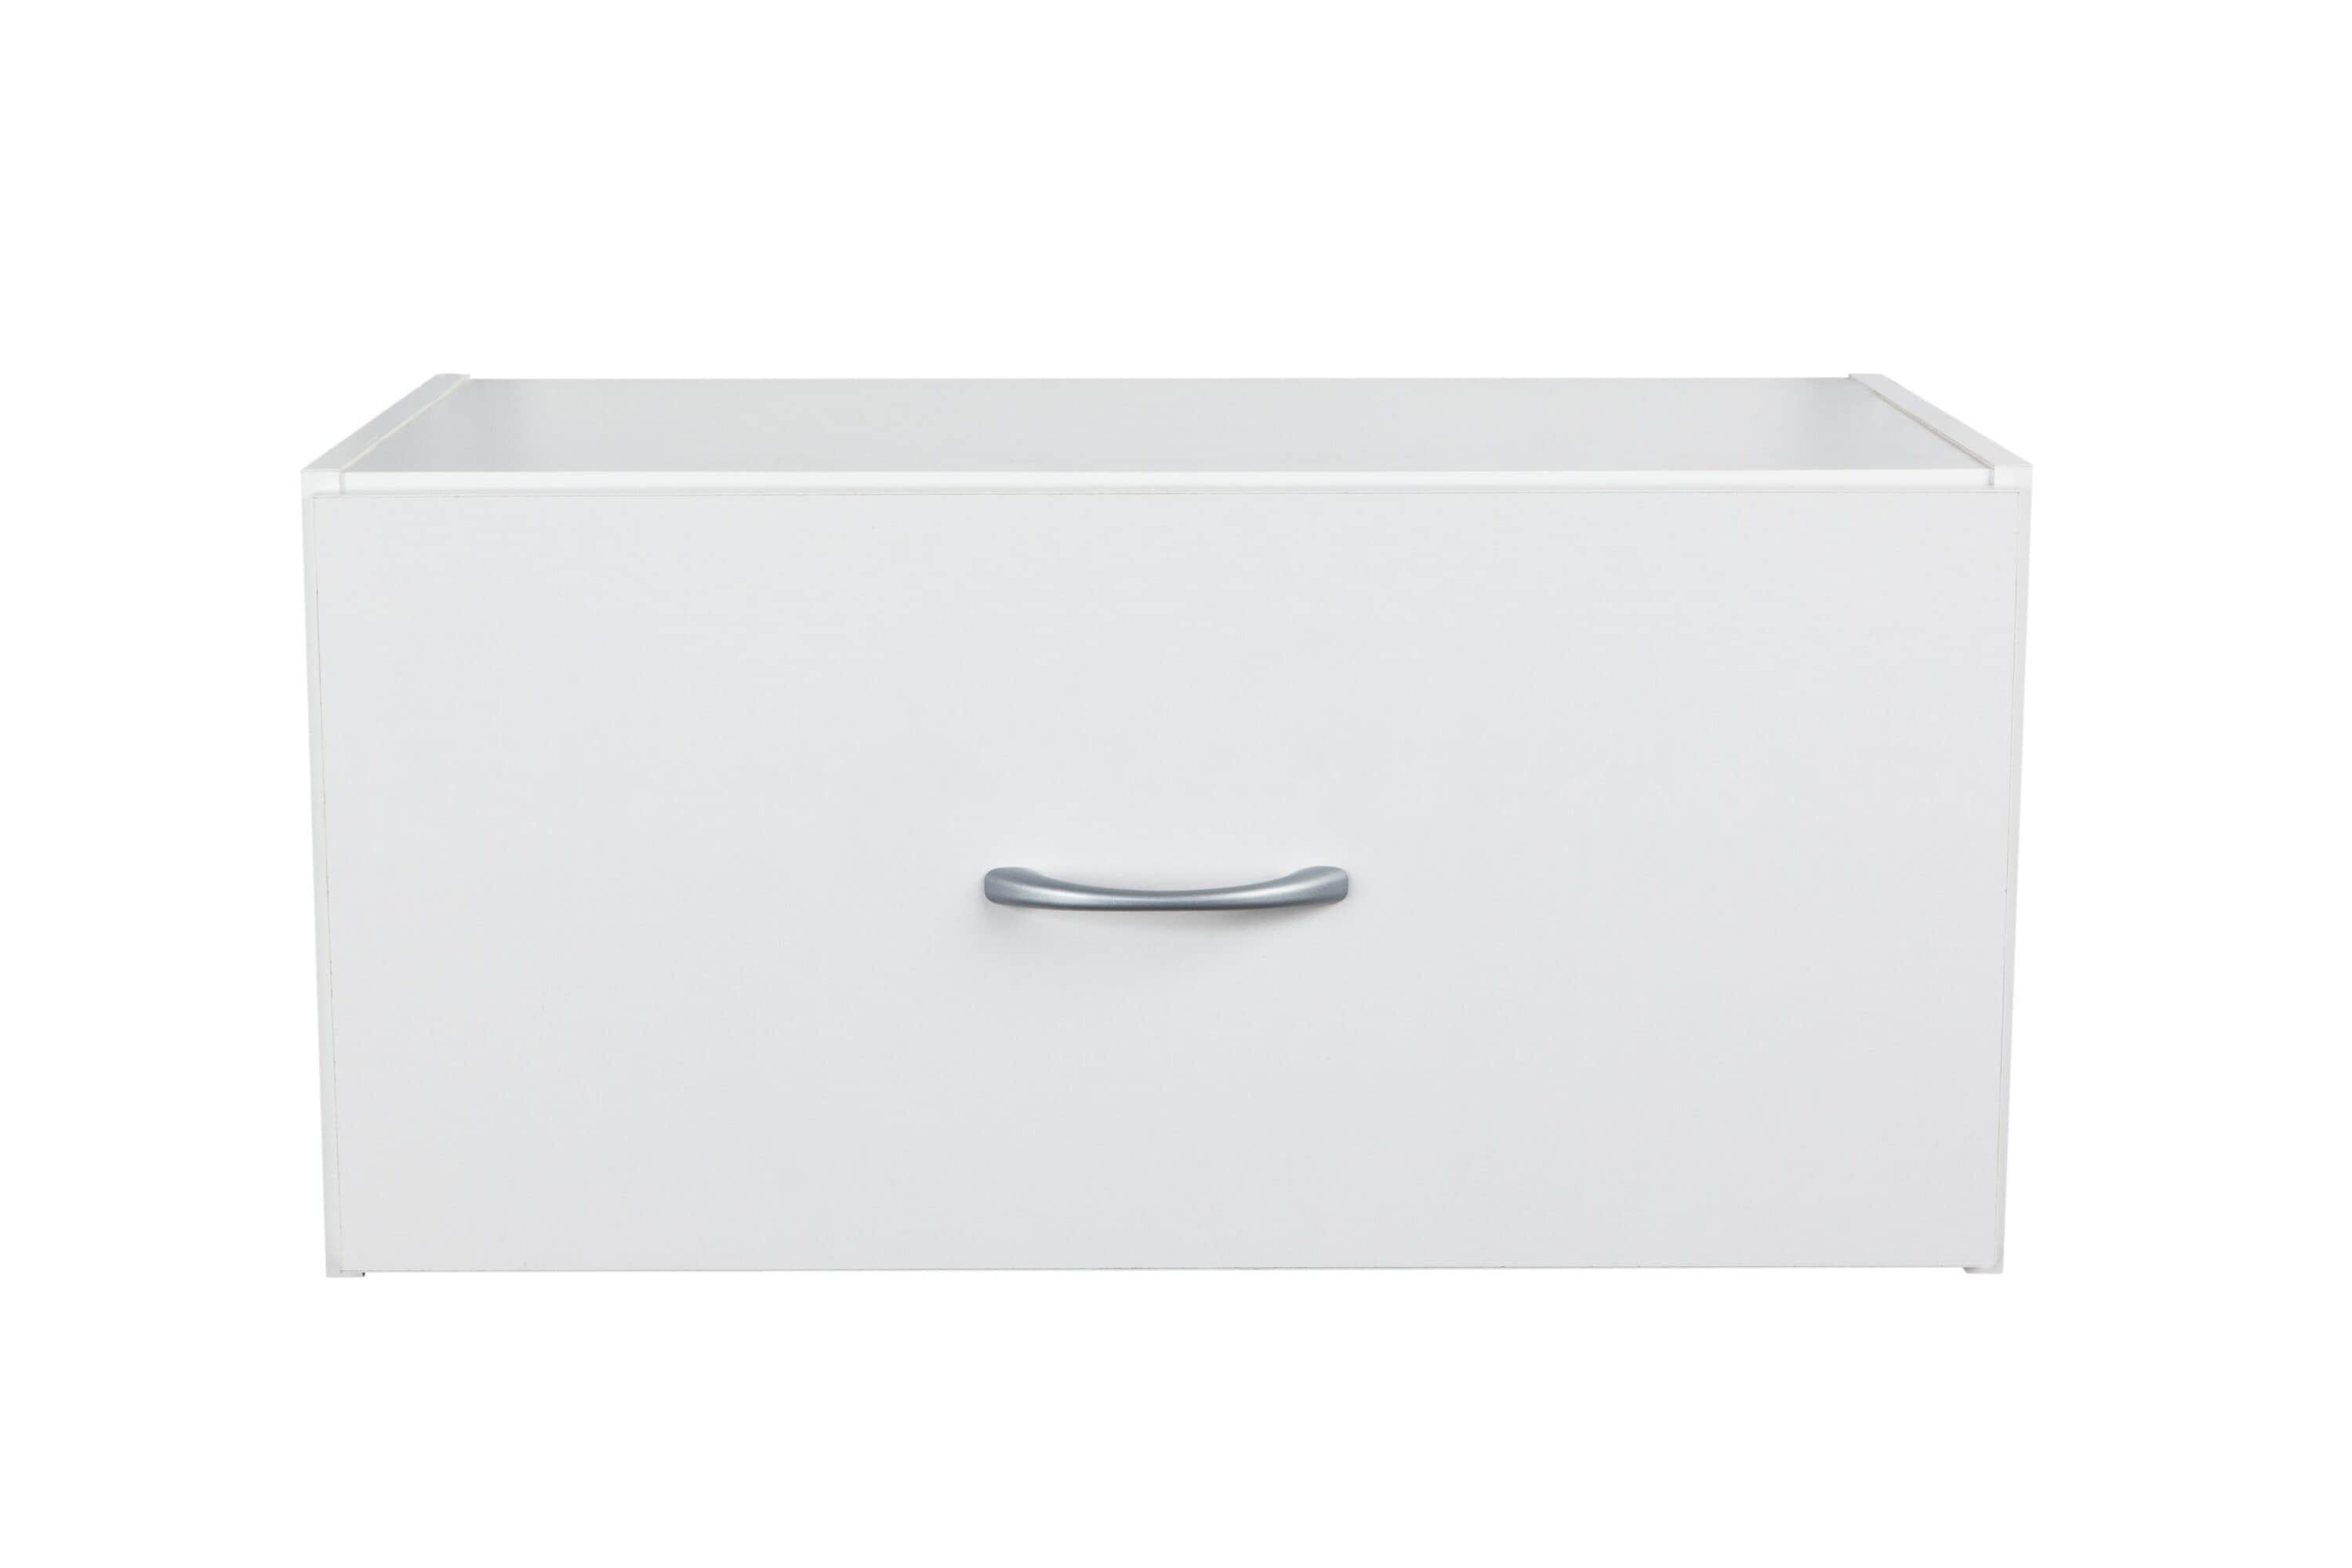 Rubbermaid FastTrack 22.9-in x 13.7-in x 11.1-in Grey Wood Drawer Unit at